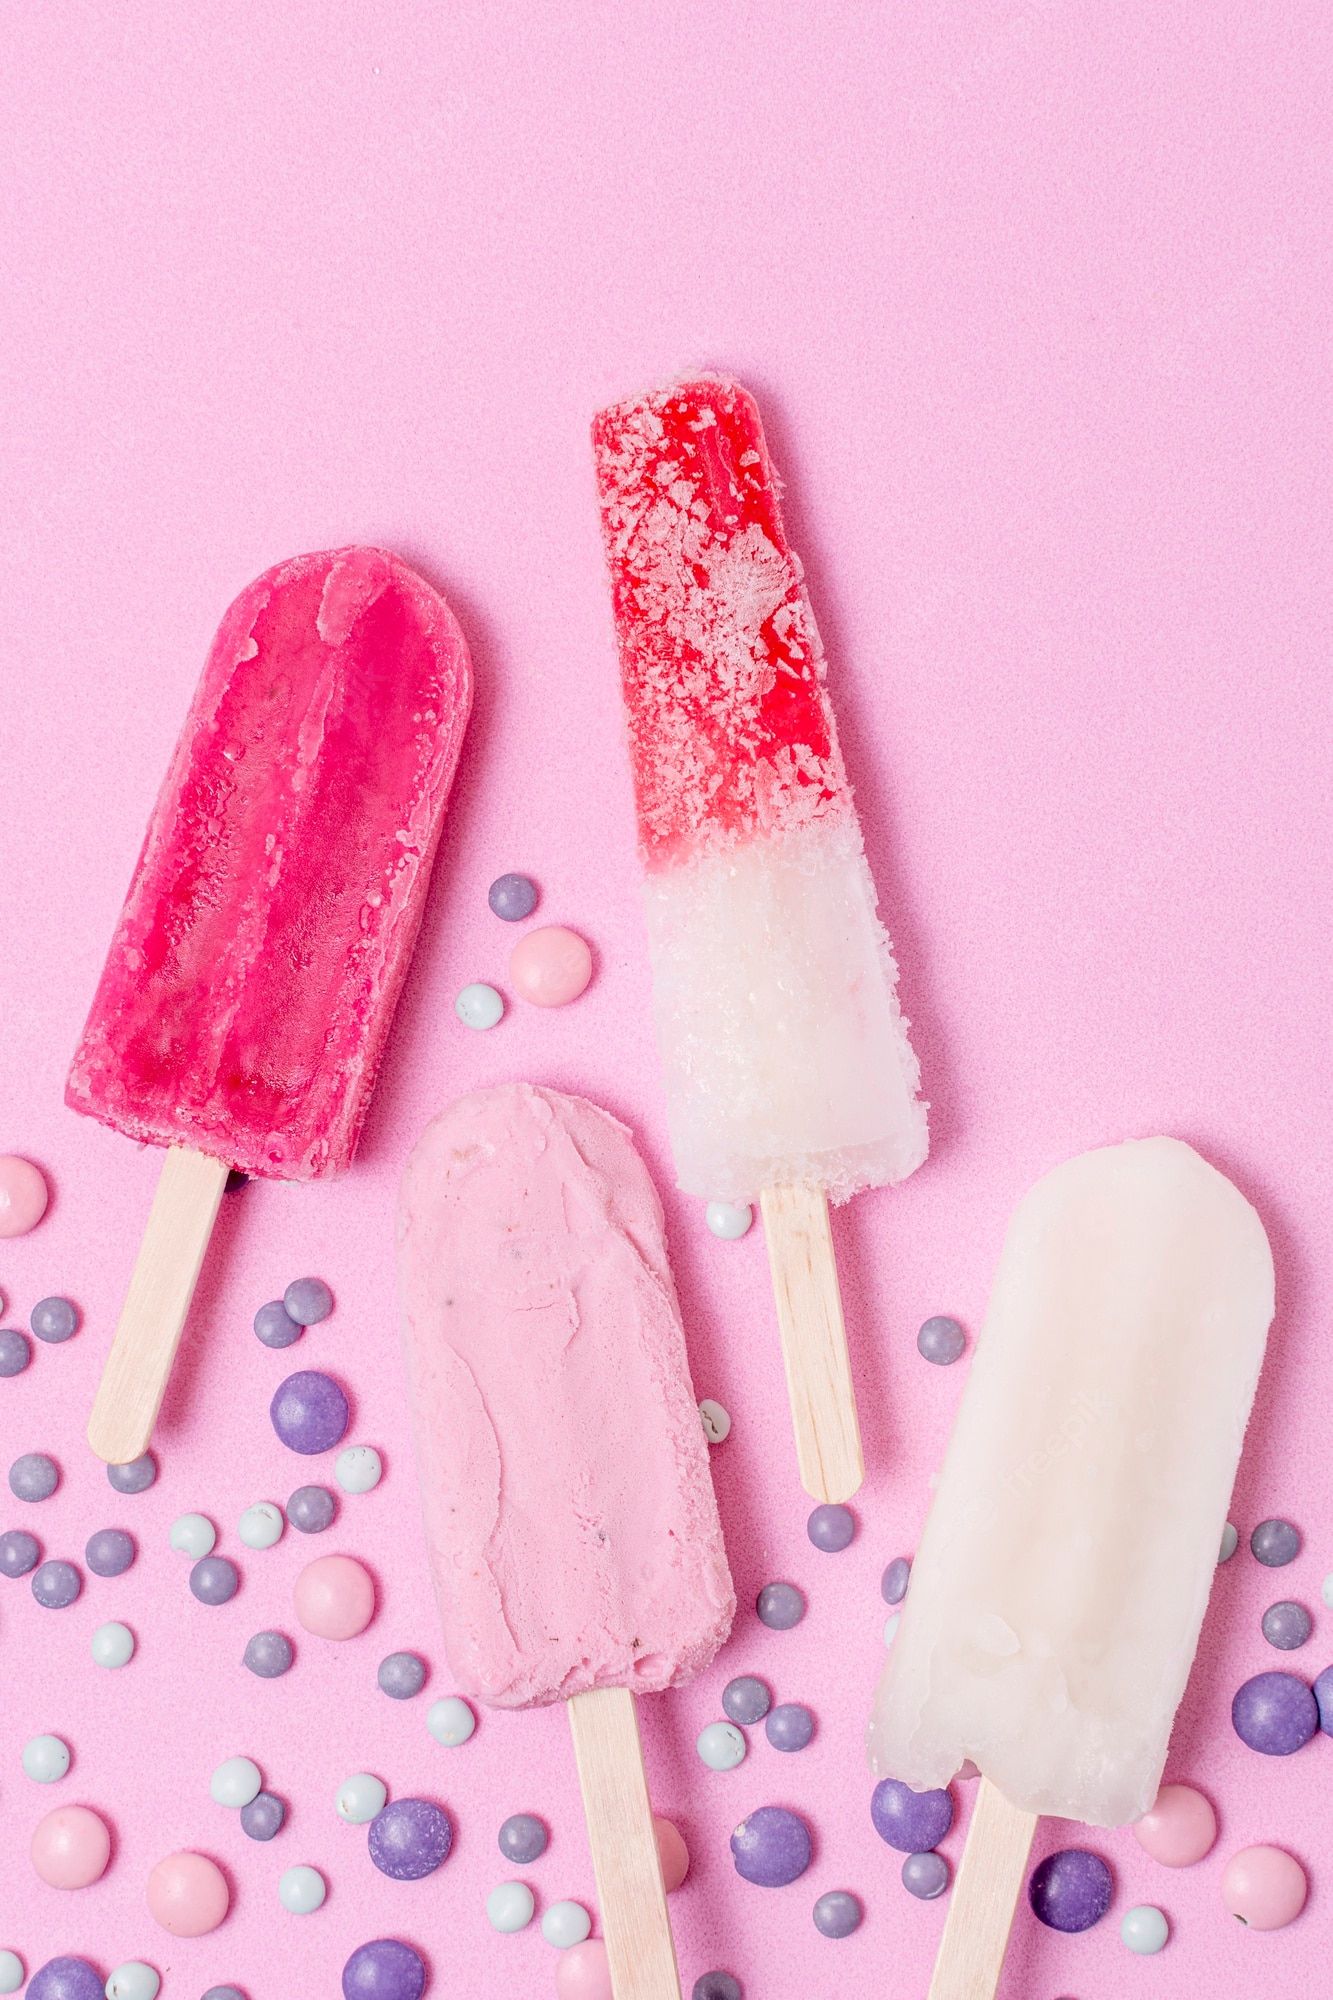 A group of popsicles on sticks with sprinkles - Ice cream